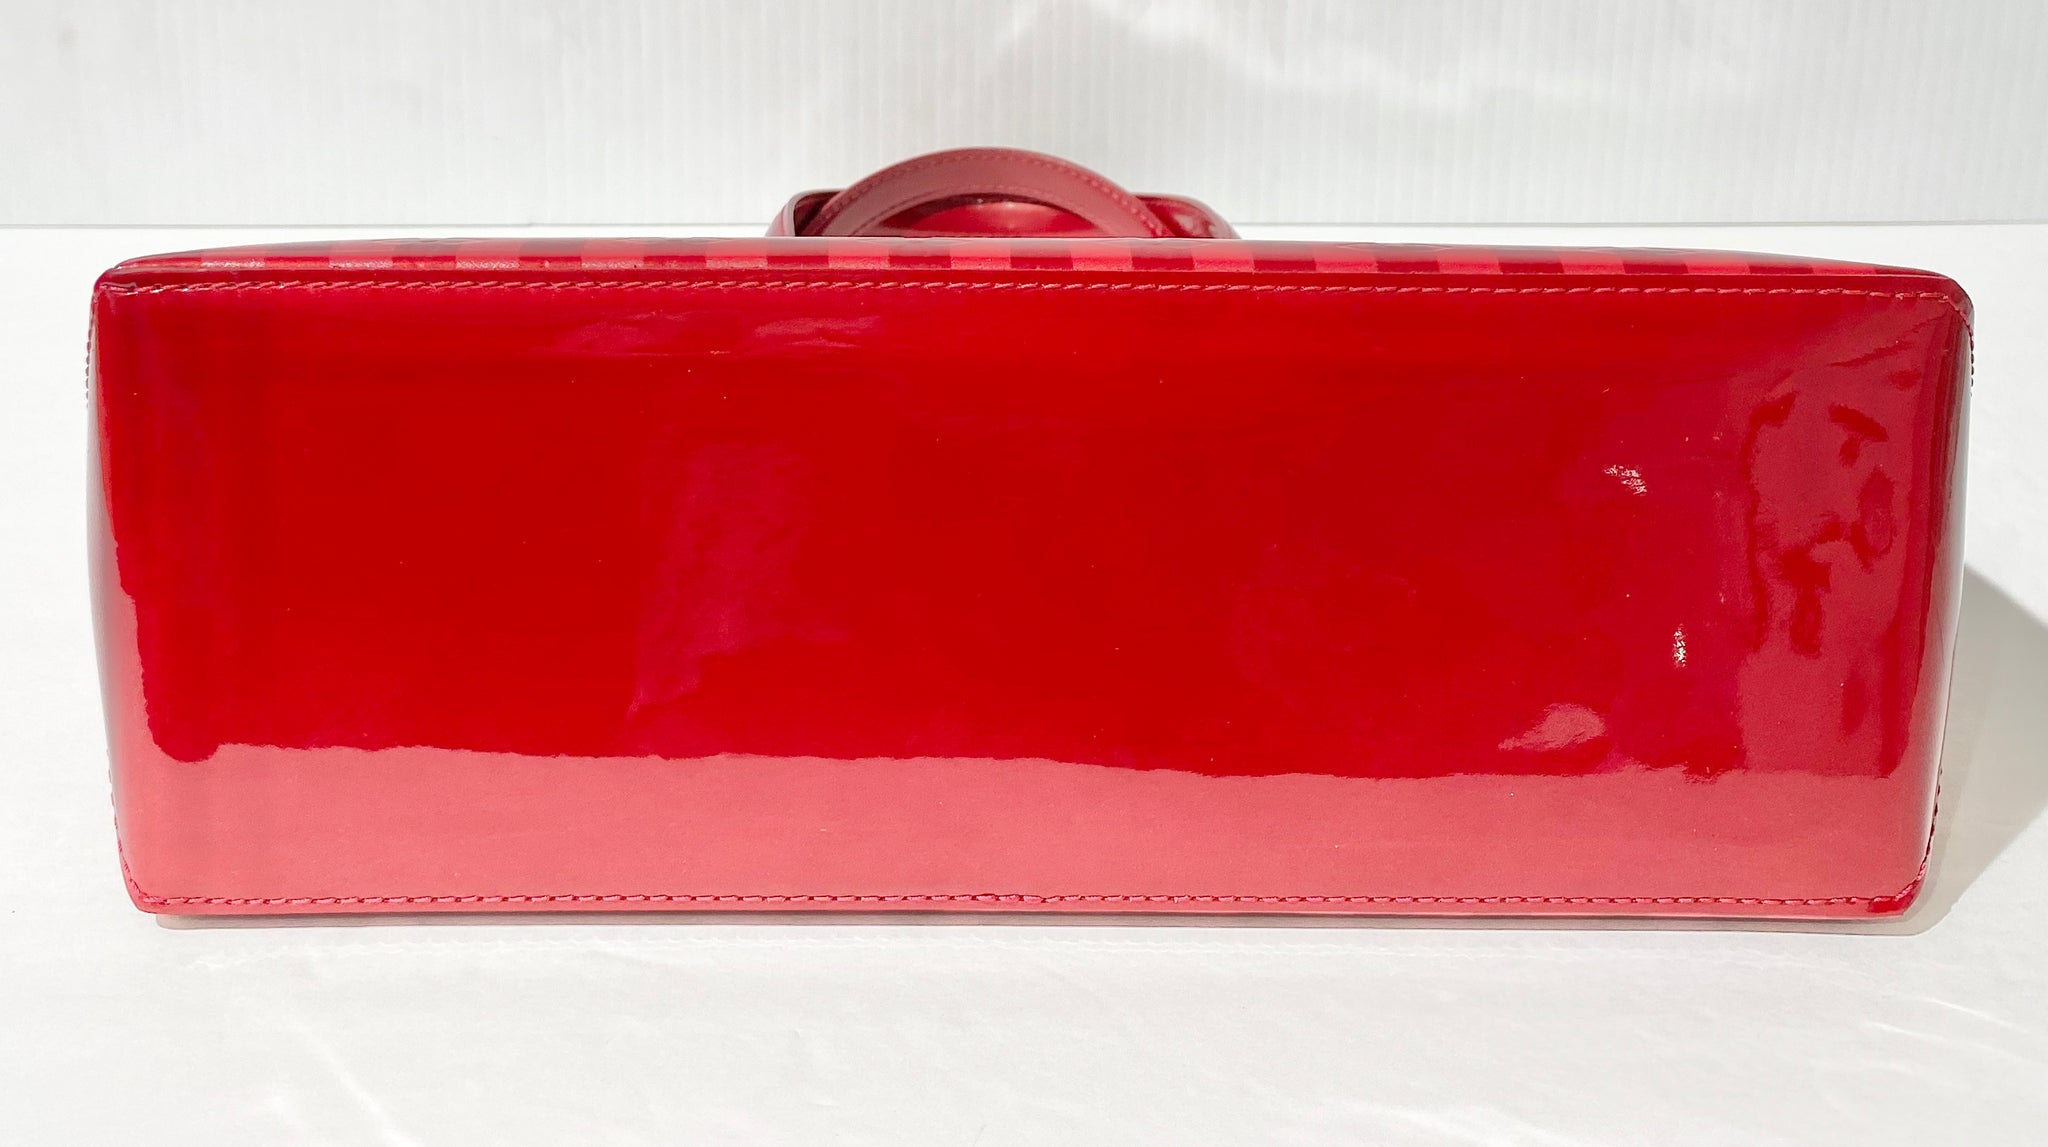 Lot 681 - A Louis Vuitton Red vernis leather Wilshire